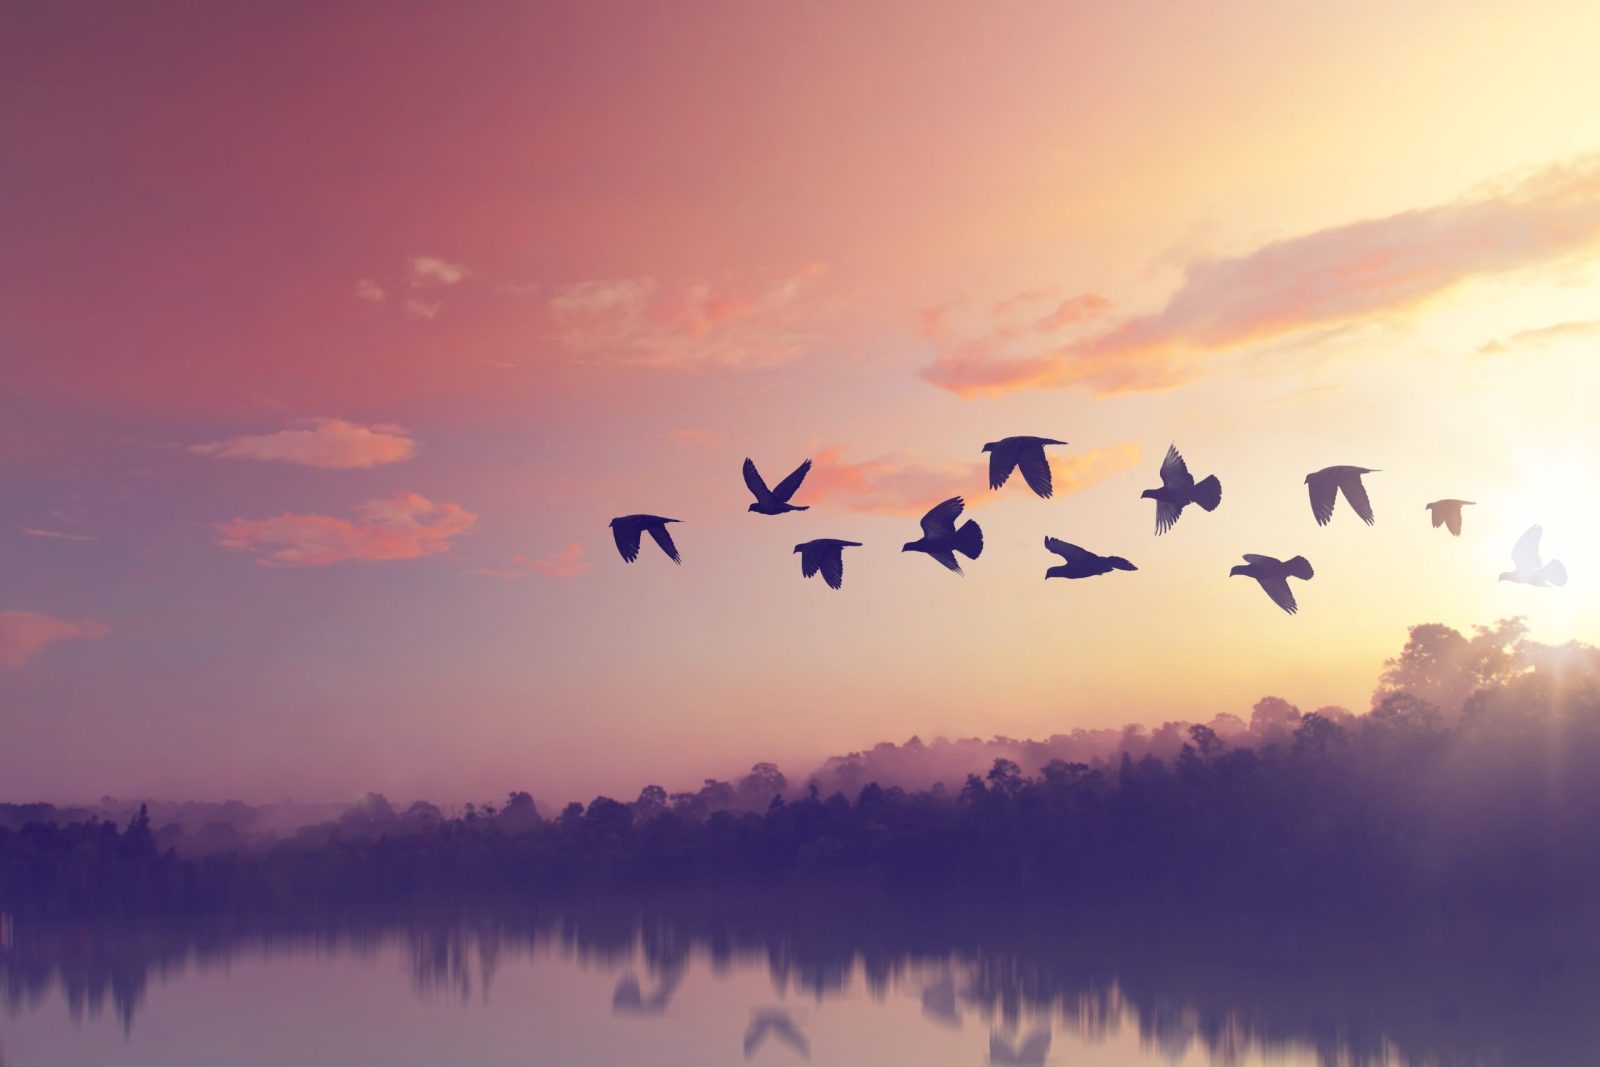 Birds flying together with sunset in background